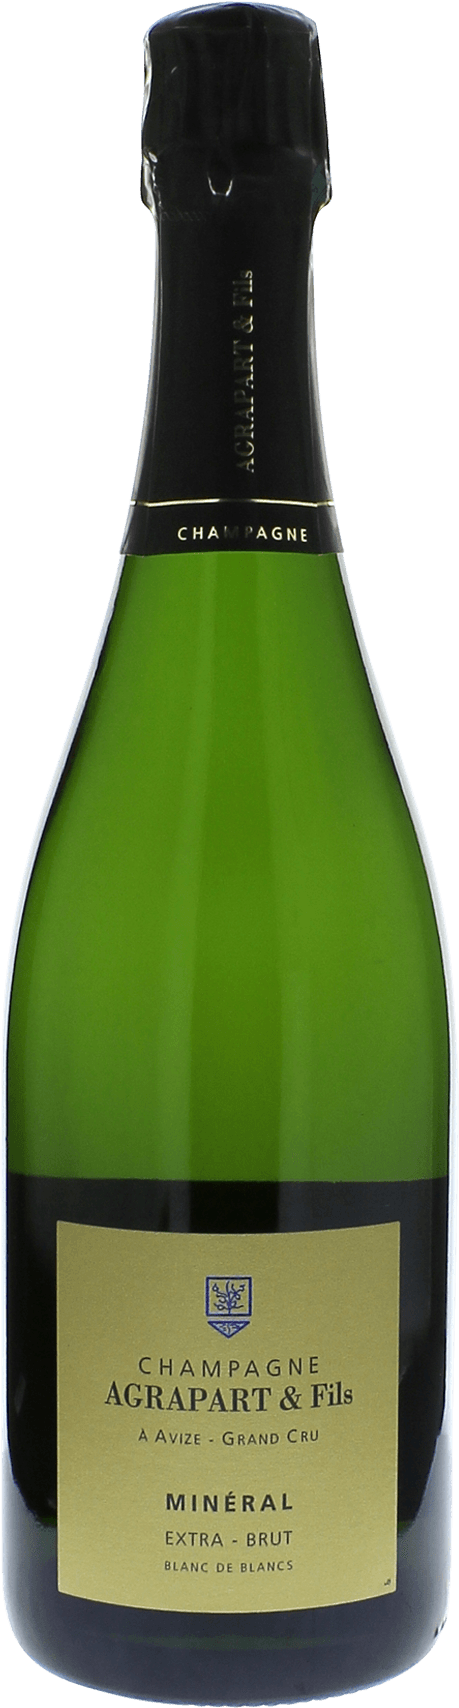 Agrapart  mineral extra brut blanc de blancs grand cru 2014  Agrapart & Fils, Champagne